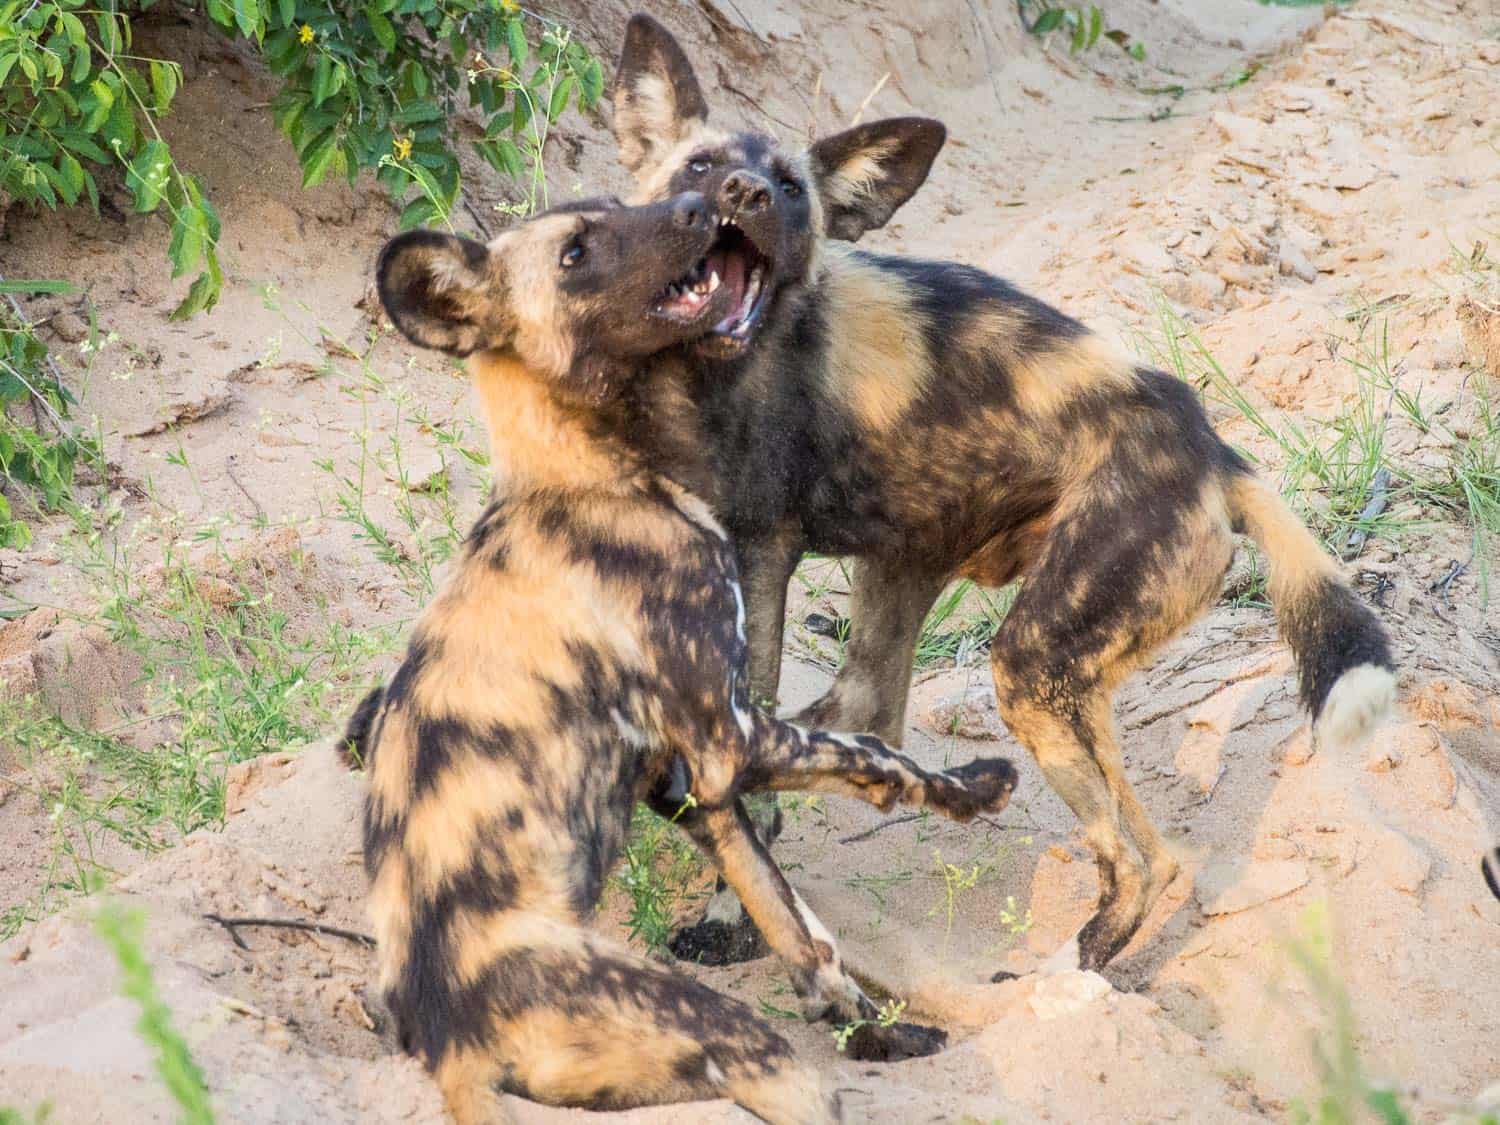 Wild dogs play fighting in a pre-hunt greeting ceremony in Timbavati Reserve on an Umlani Bush Camp game drive